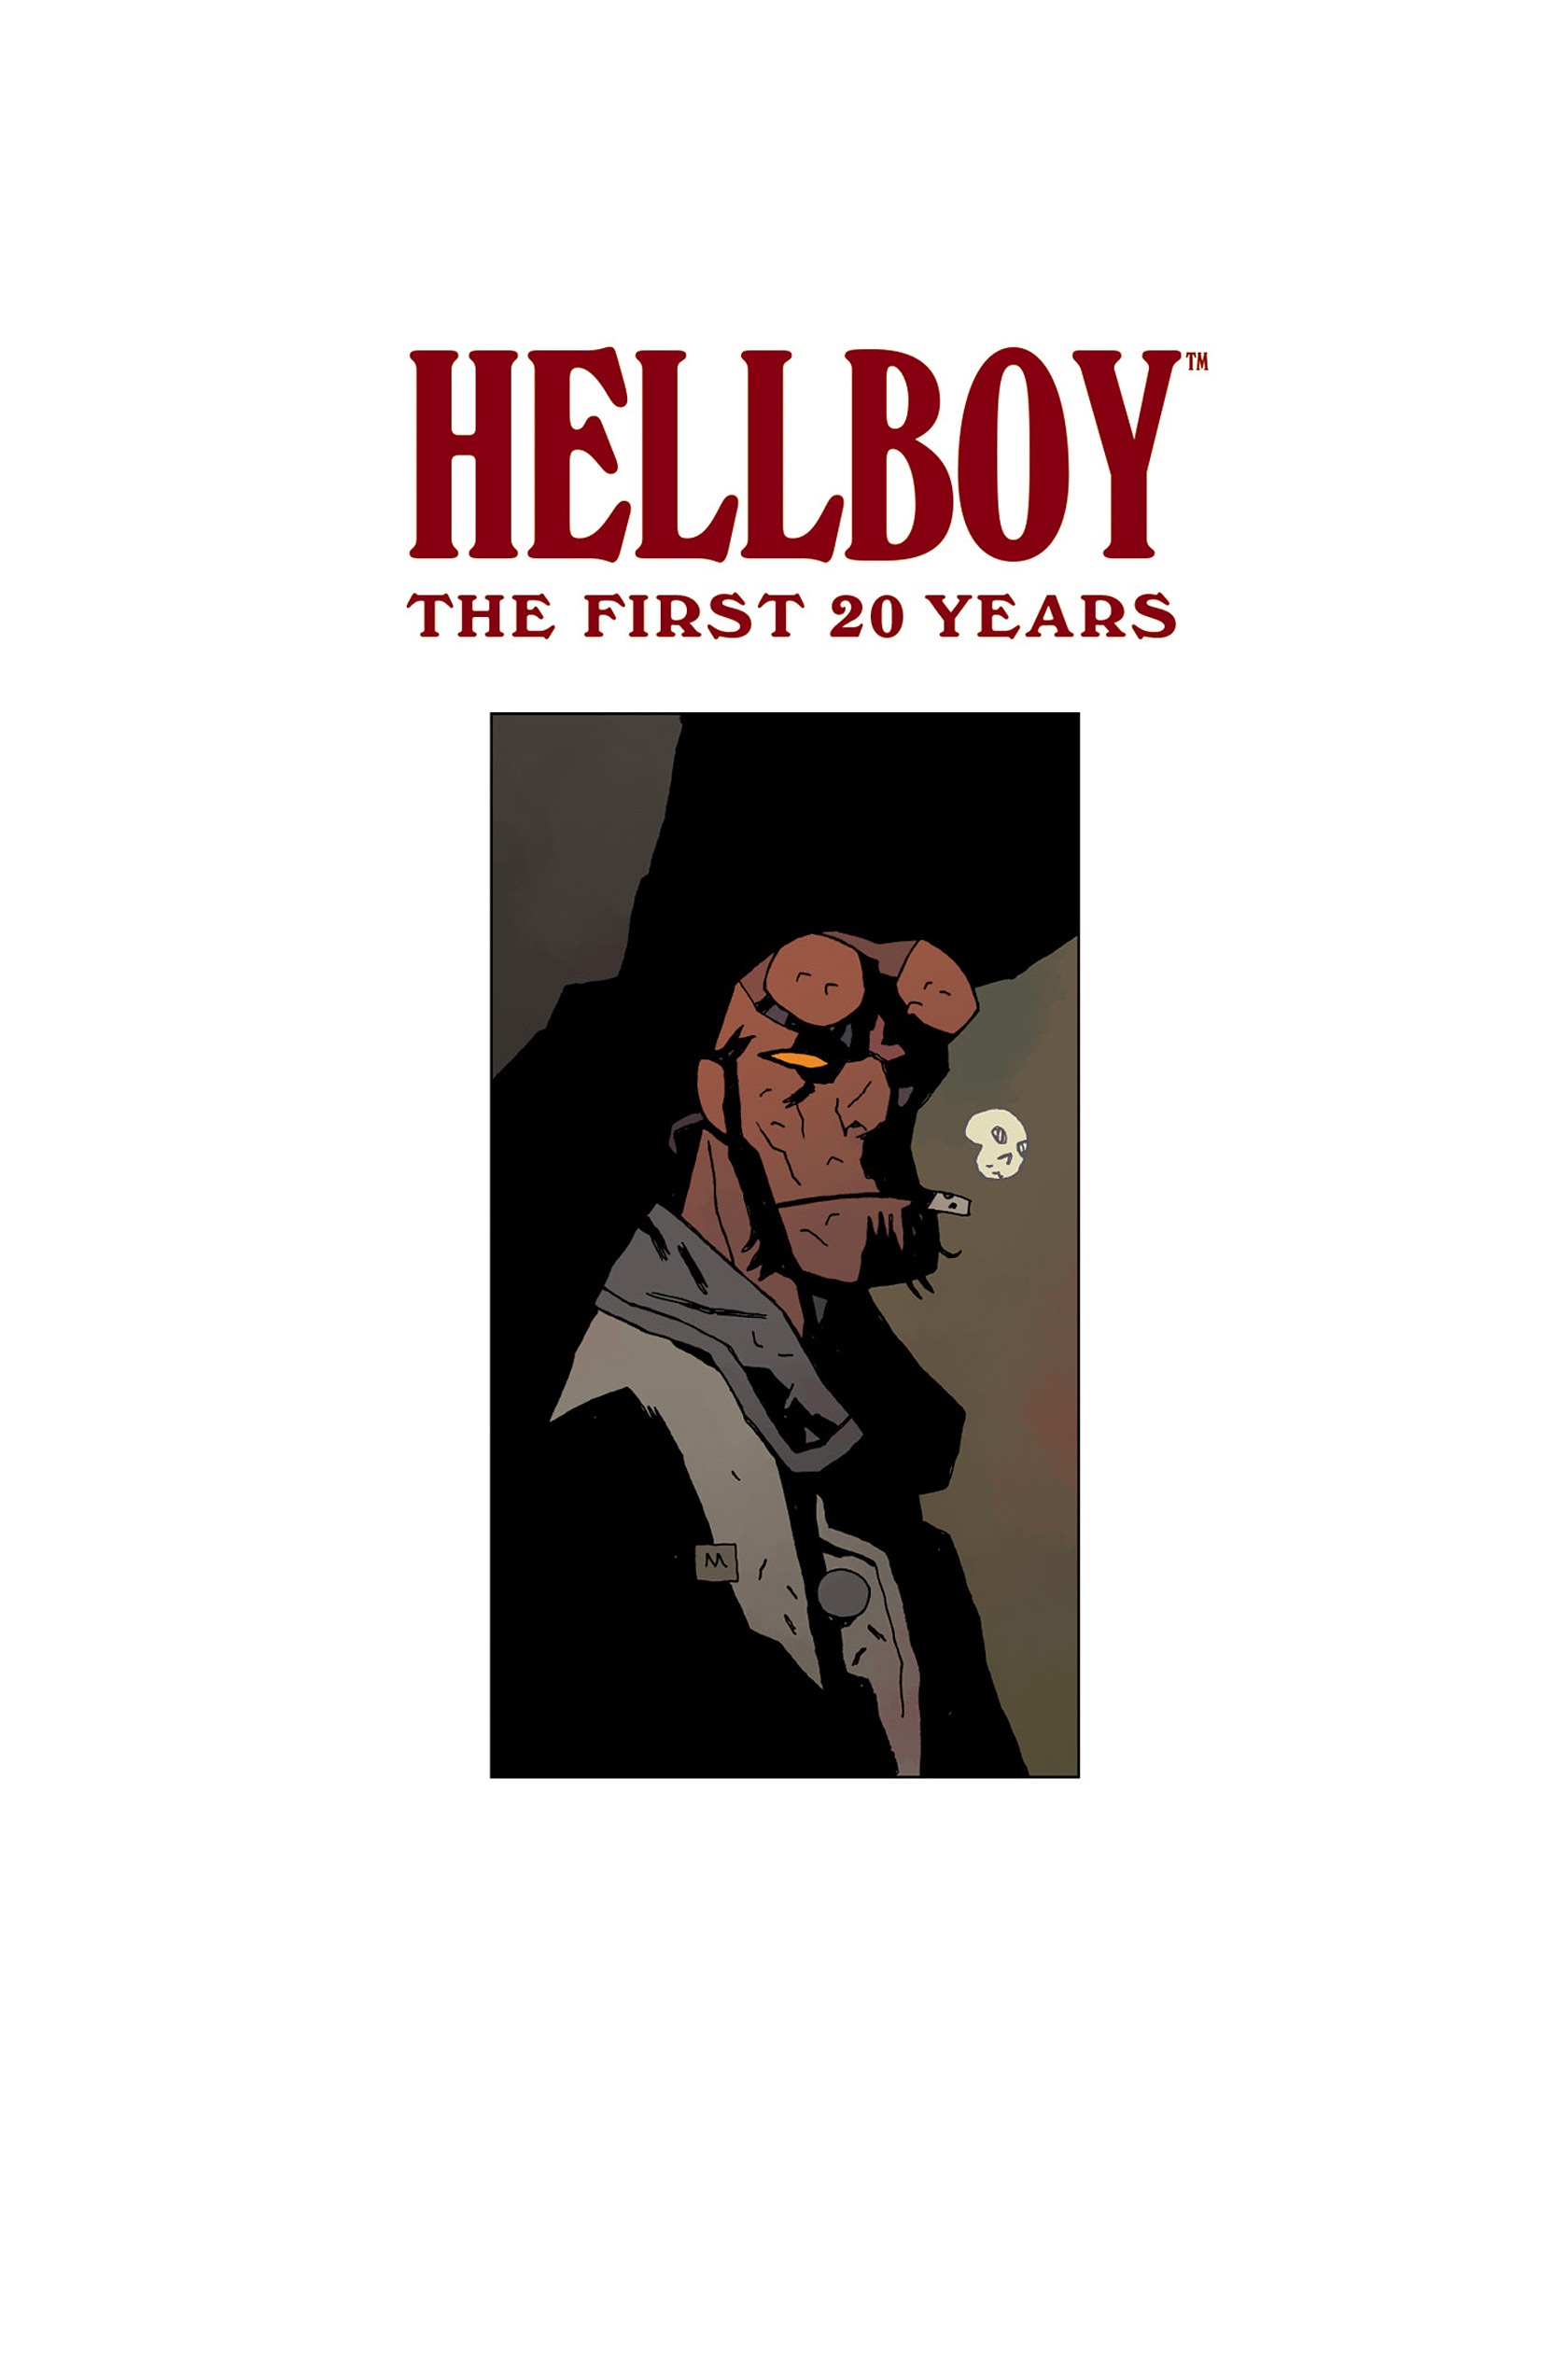 Read online Hellboy: The First 20 Years comic -  Issue # TPB - 2